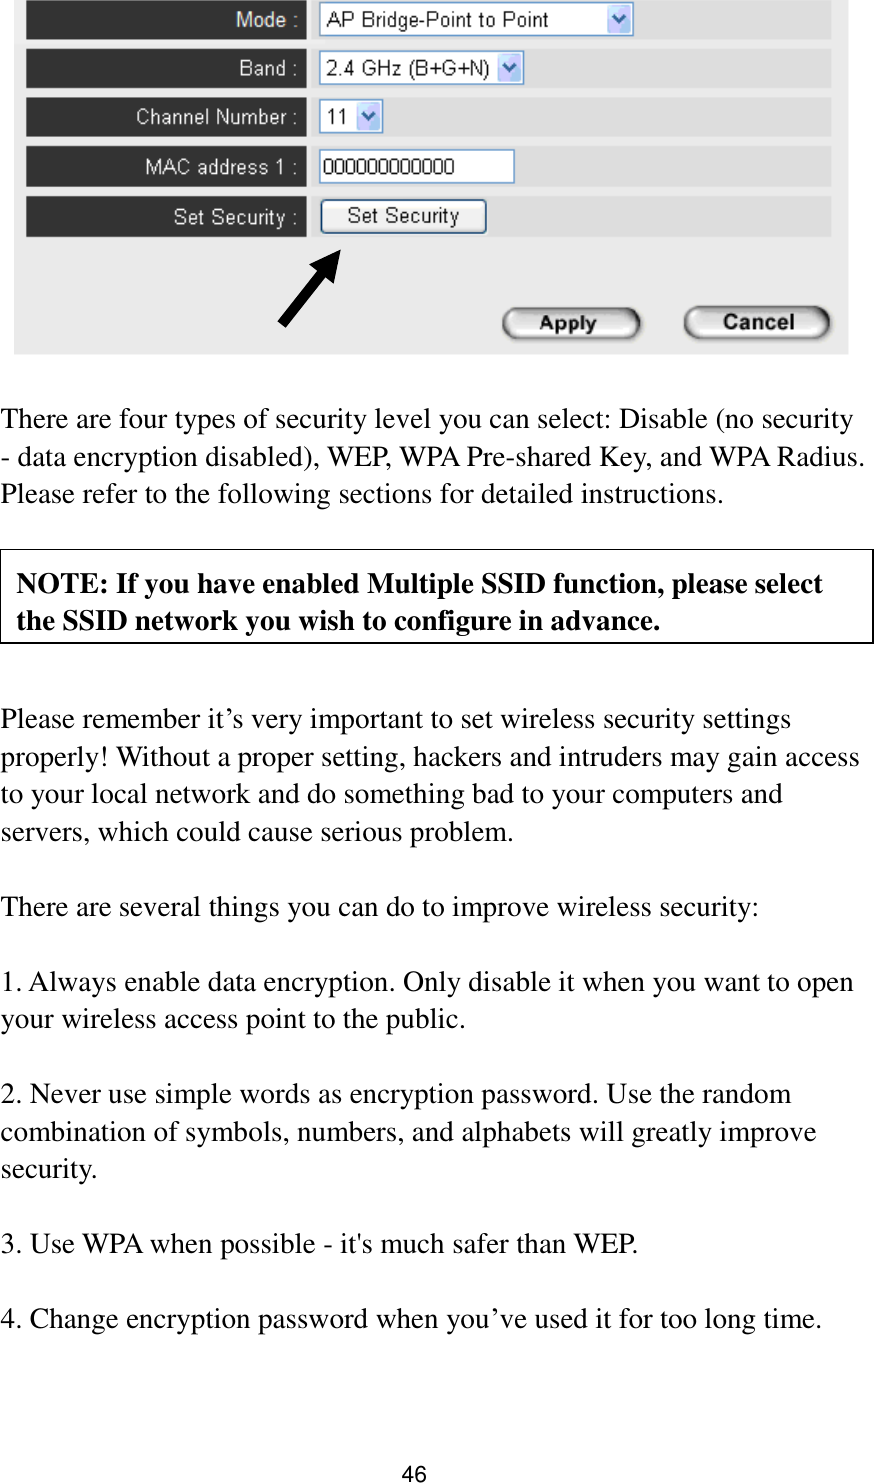 46     There are four types of security level you can select: Disable (no security - data encryption disabled), WEP, WPA Pre-shared Key, and WPA Radius. Please refer to the following sections for detailed instructions.      Please remember it‟s very important to set wireless security settings properly! Without a proper setting, hackers and intruders may gain access to your local network and do something bad to your computers and servers, which could cause serious problem.    There are several things you can do to improve wireless security:  1. Always enable data encryption. Only disable it when you want to open your wireless access point to the public.  2. Never use simple words as encryption password. Use the random combination of symbols, numbers, and alphabets will greatly improve security.  3. Use WPA when possible - it&apos;s much safer than WEP.  4. Change encryption password when you‟ve used it for too long time. NOTE: If you have enabled Multiple SSID function, please select the SSID network you wish to configure in advance. 